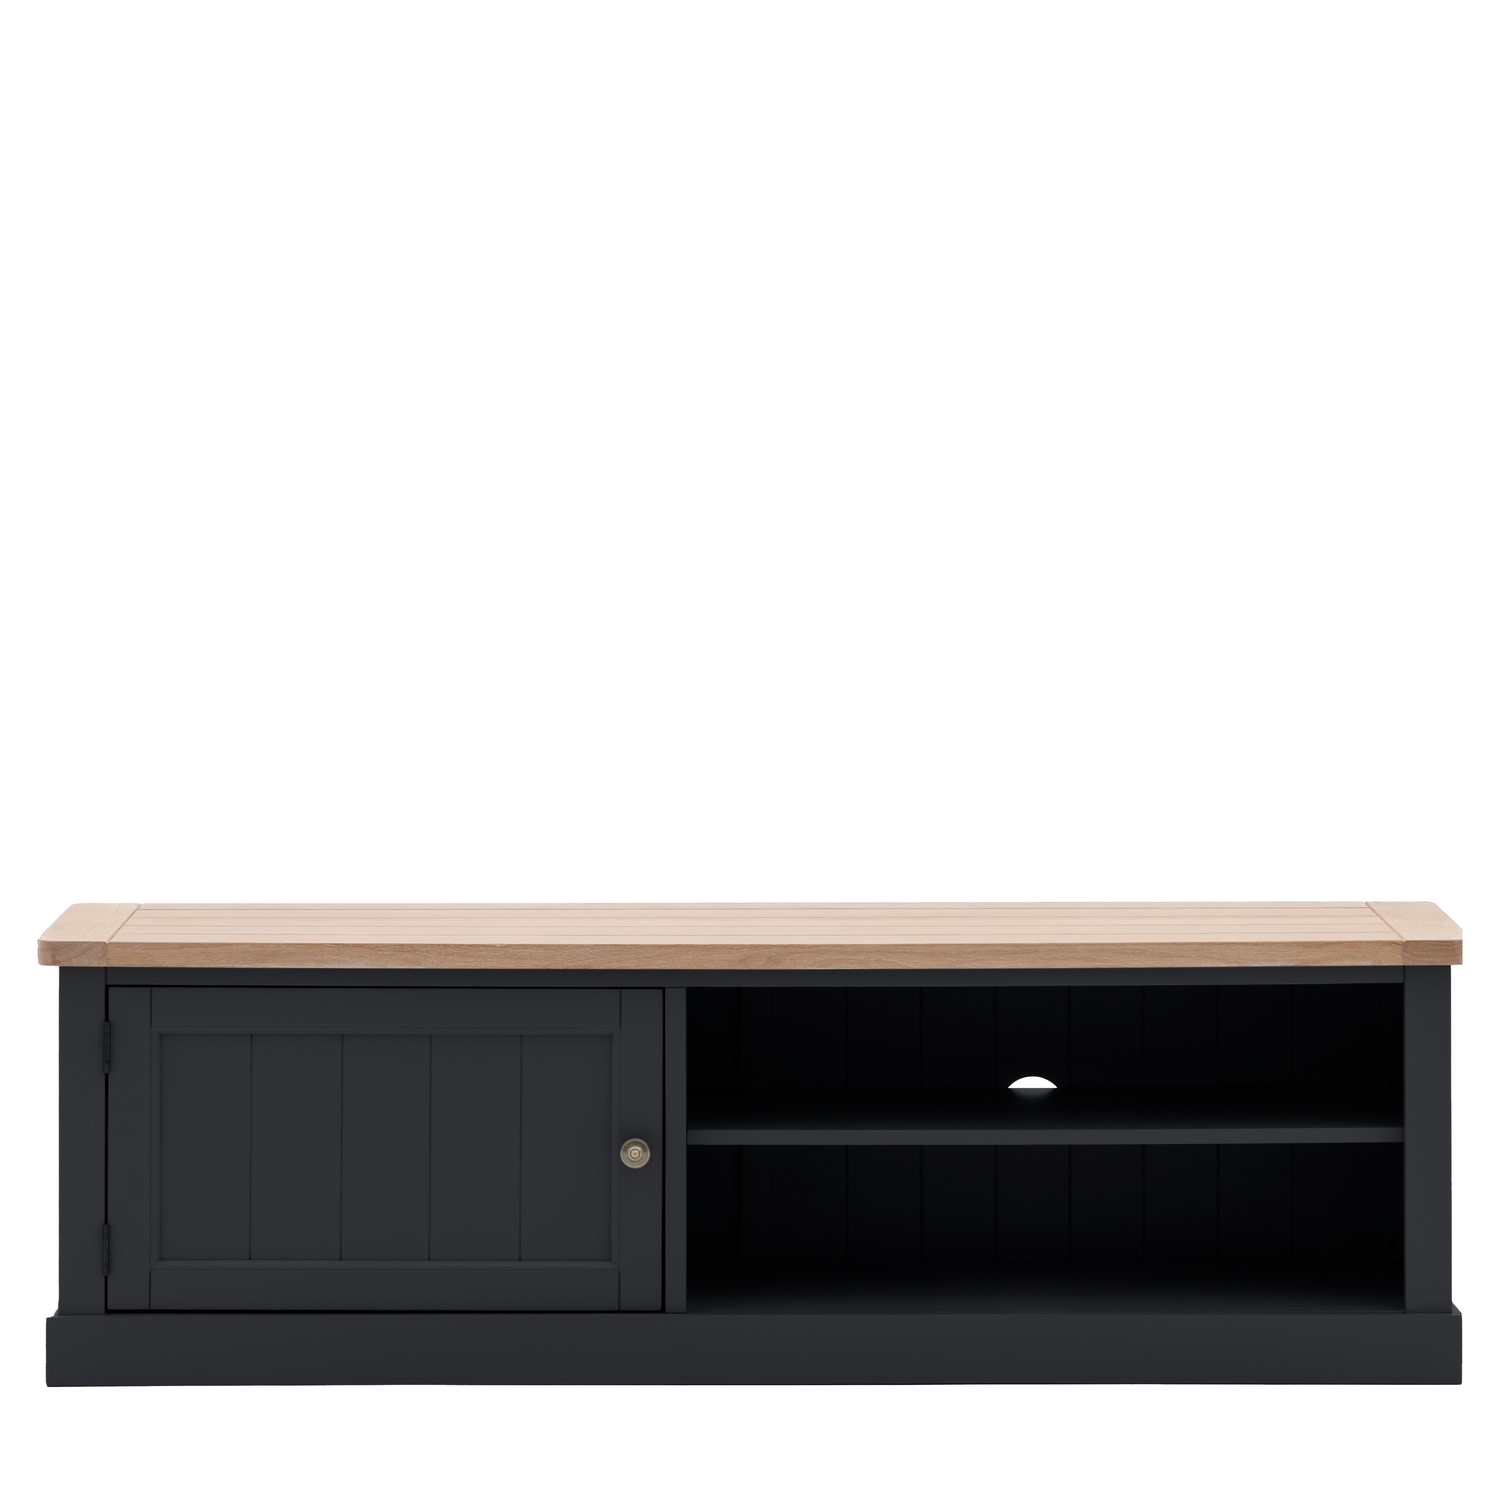 Read more about Eton tv stand navy caspian house